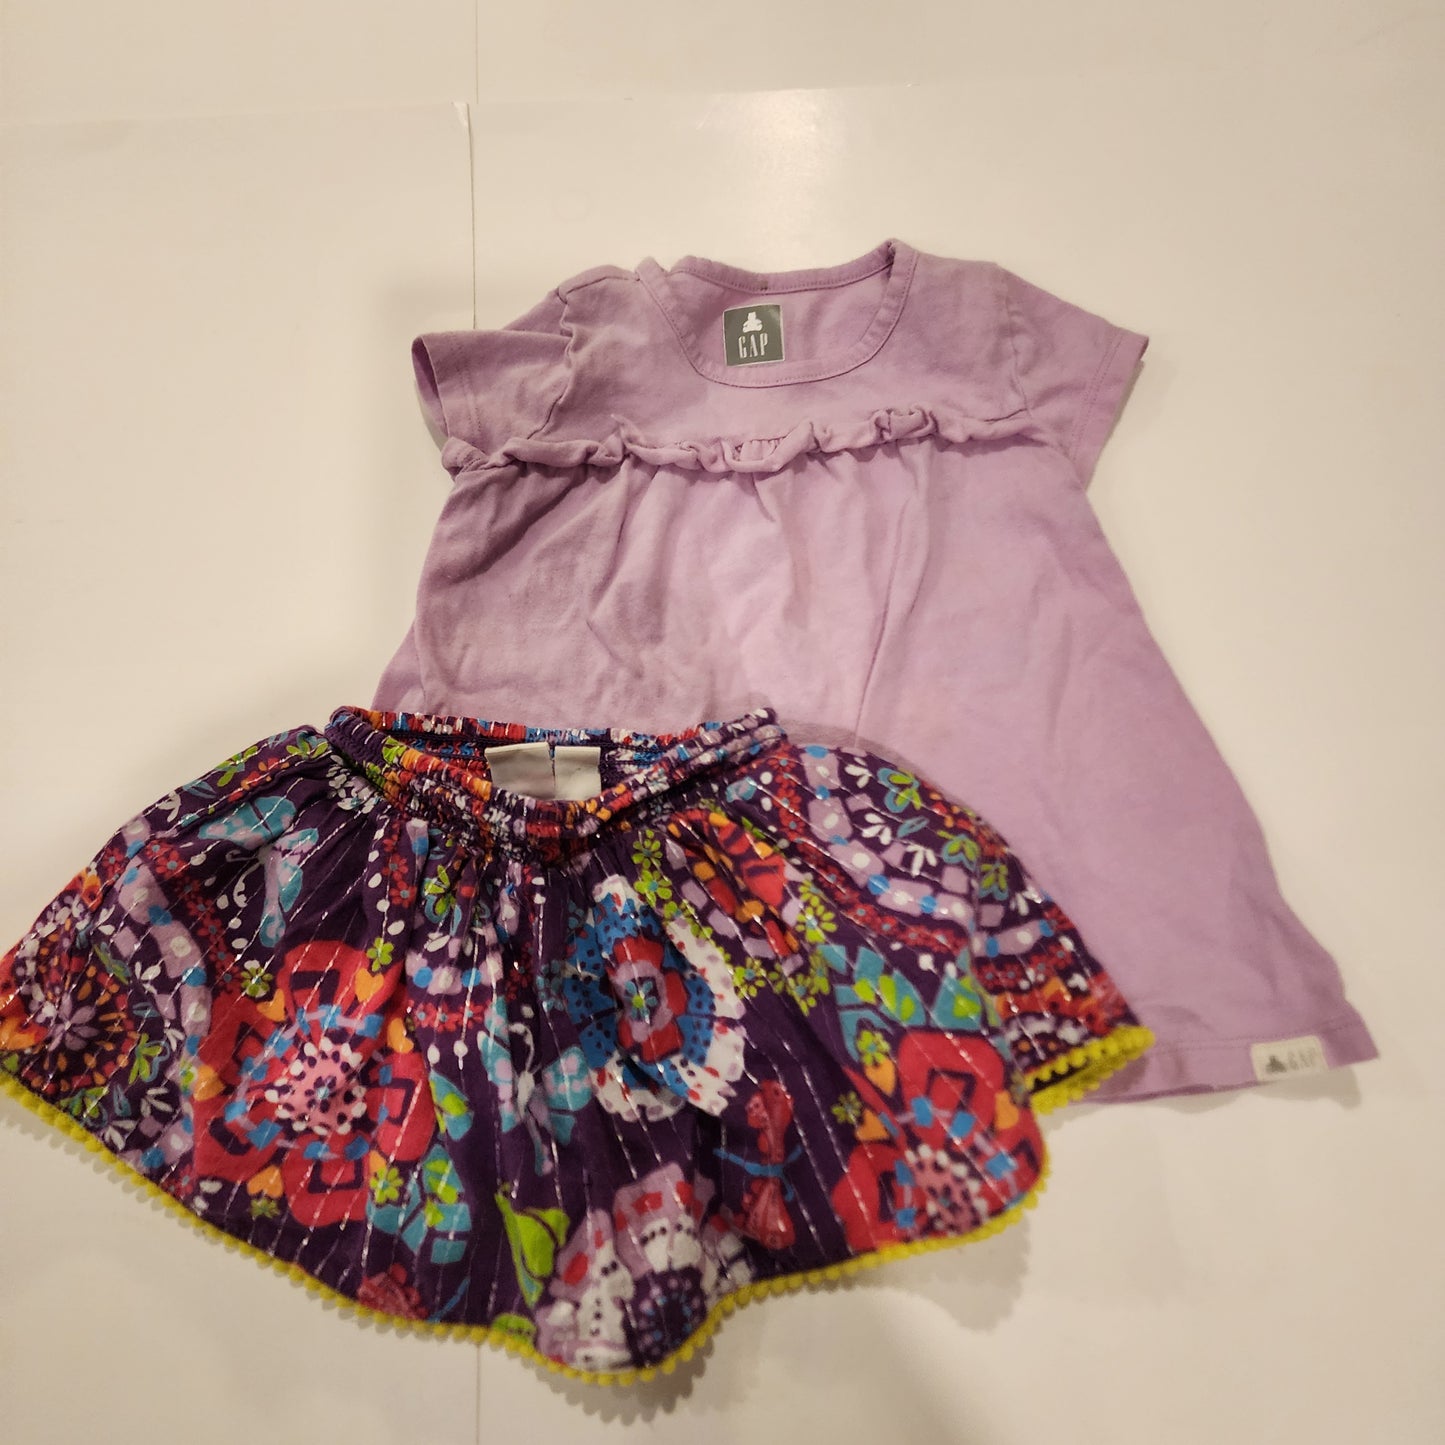 Girls 2T Gap & Childrens Place outfit